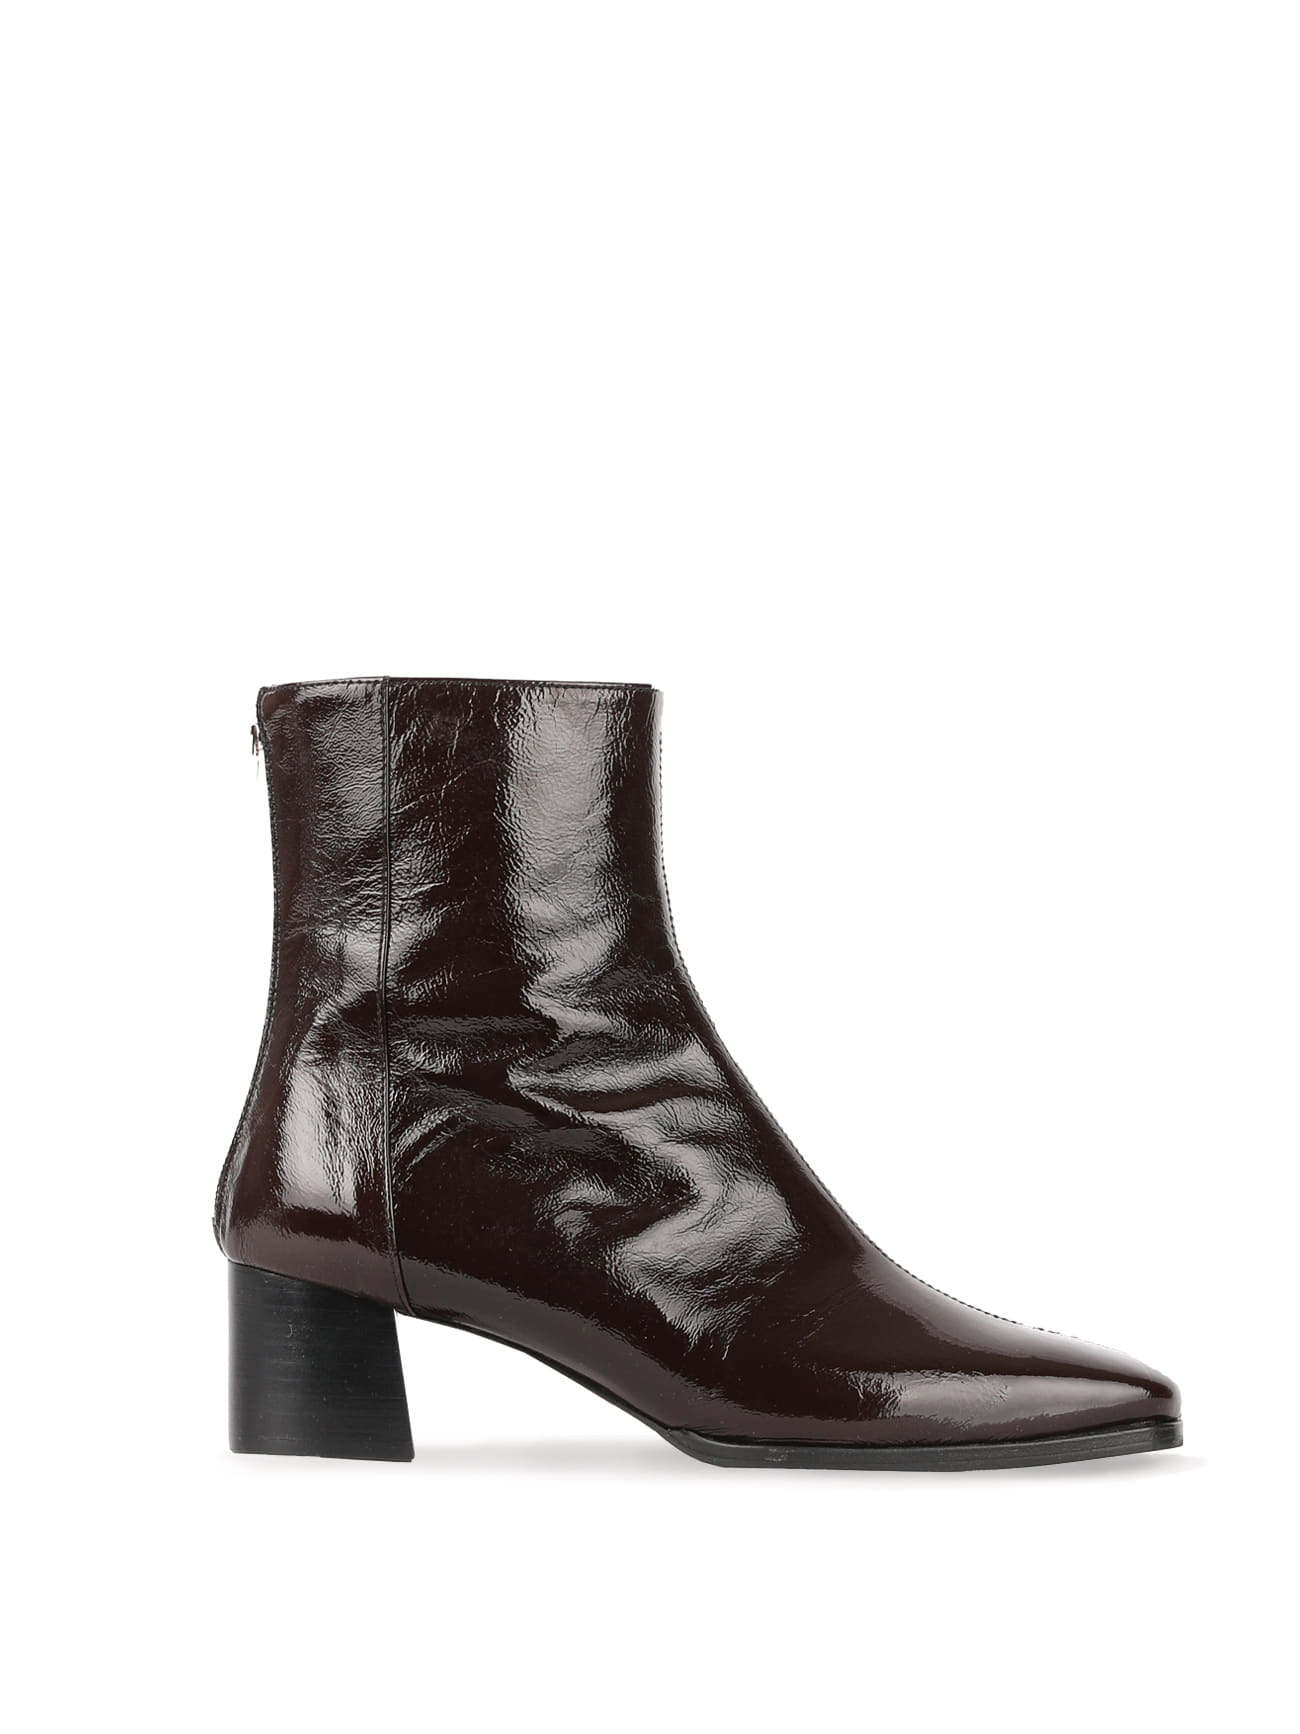 JAMES BLOCK HEEL LEATHER ANKLE BOOTS - CHOCO BROWN